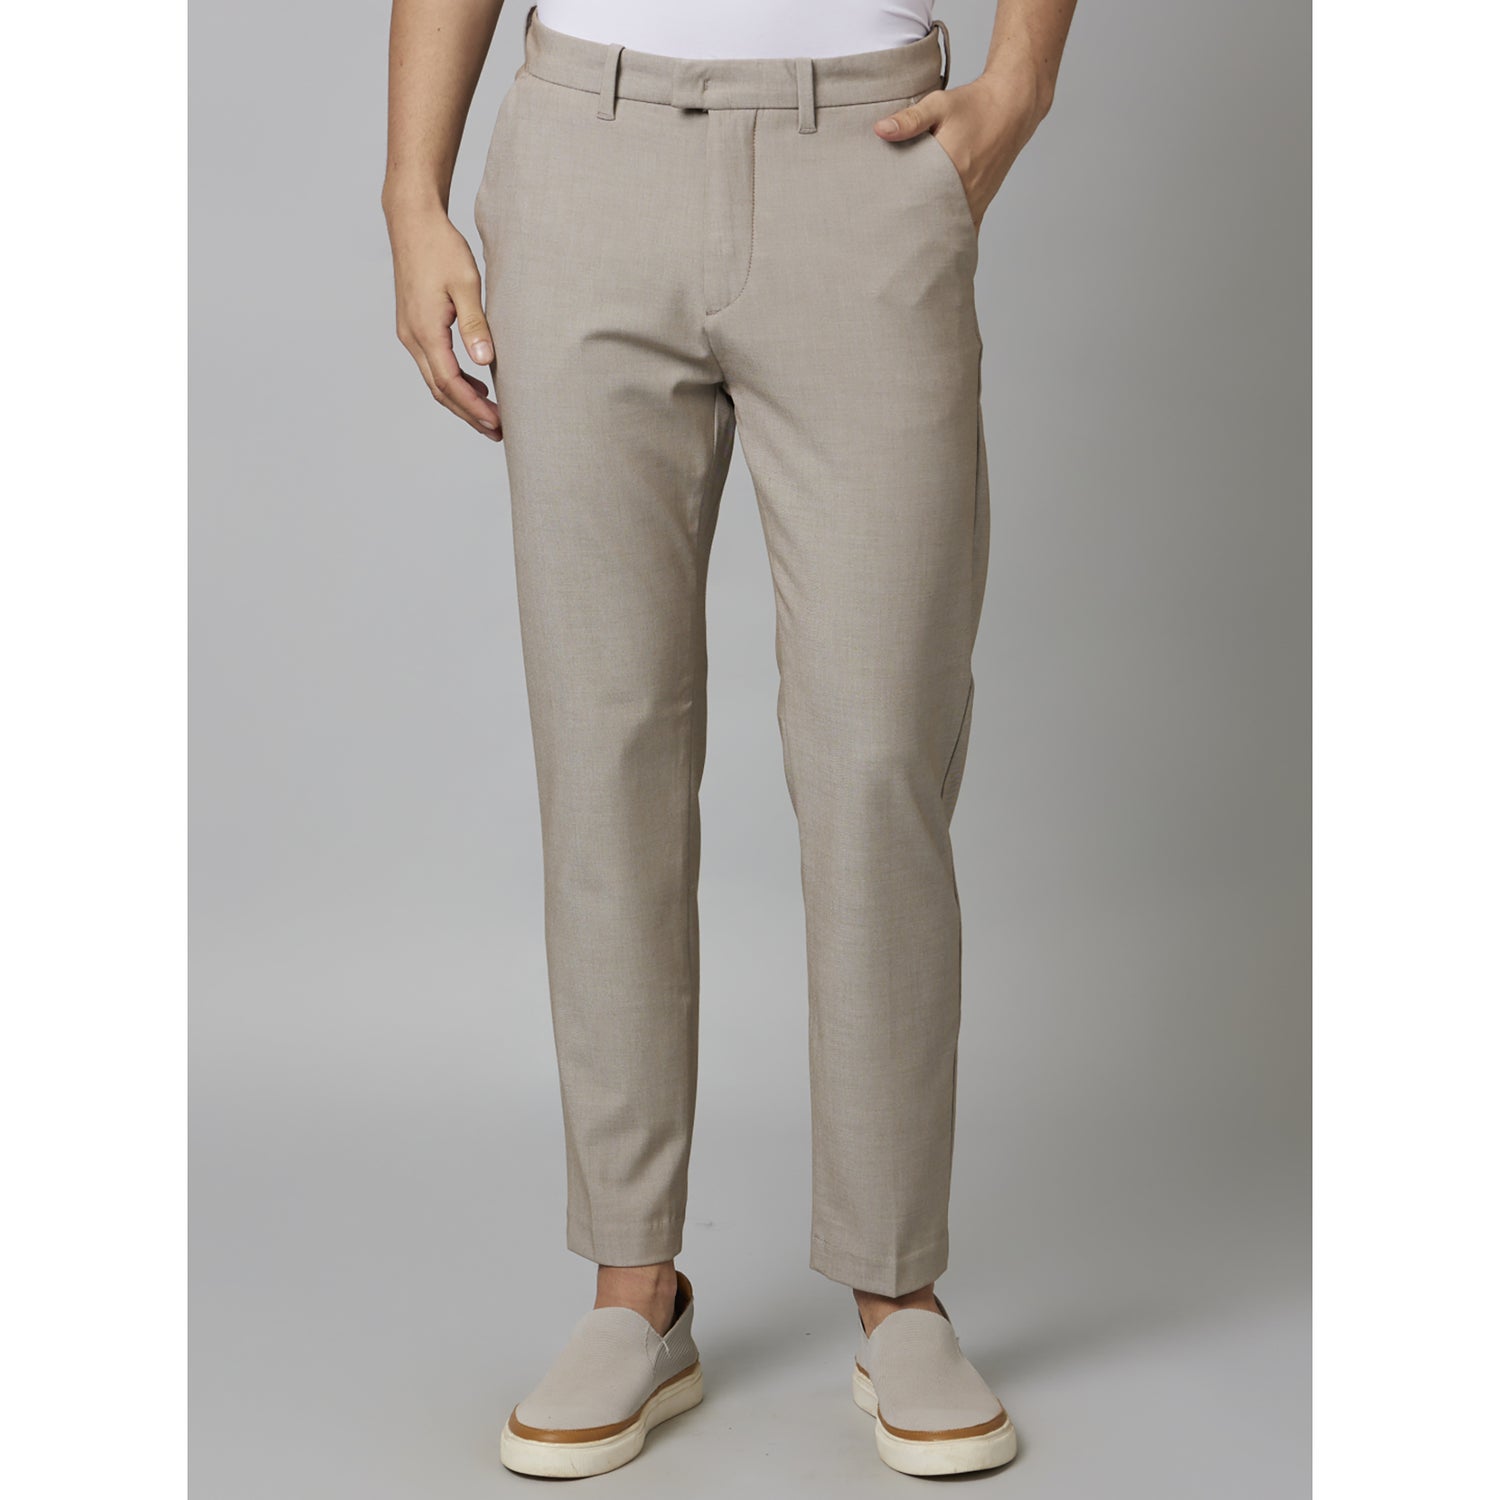 Beige Solid Poly Blend Trousers (DOCLUN)